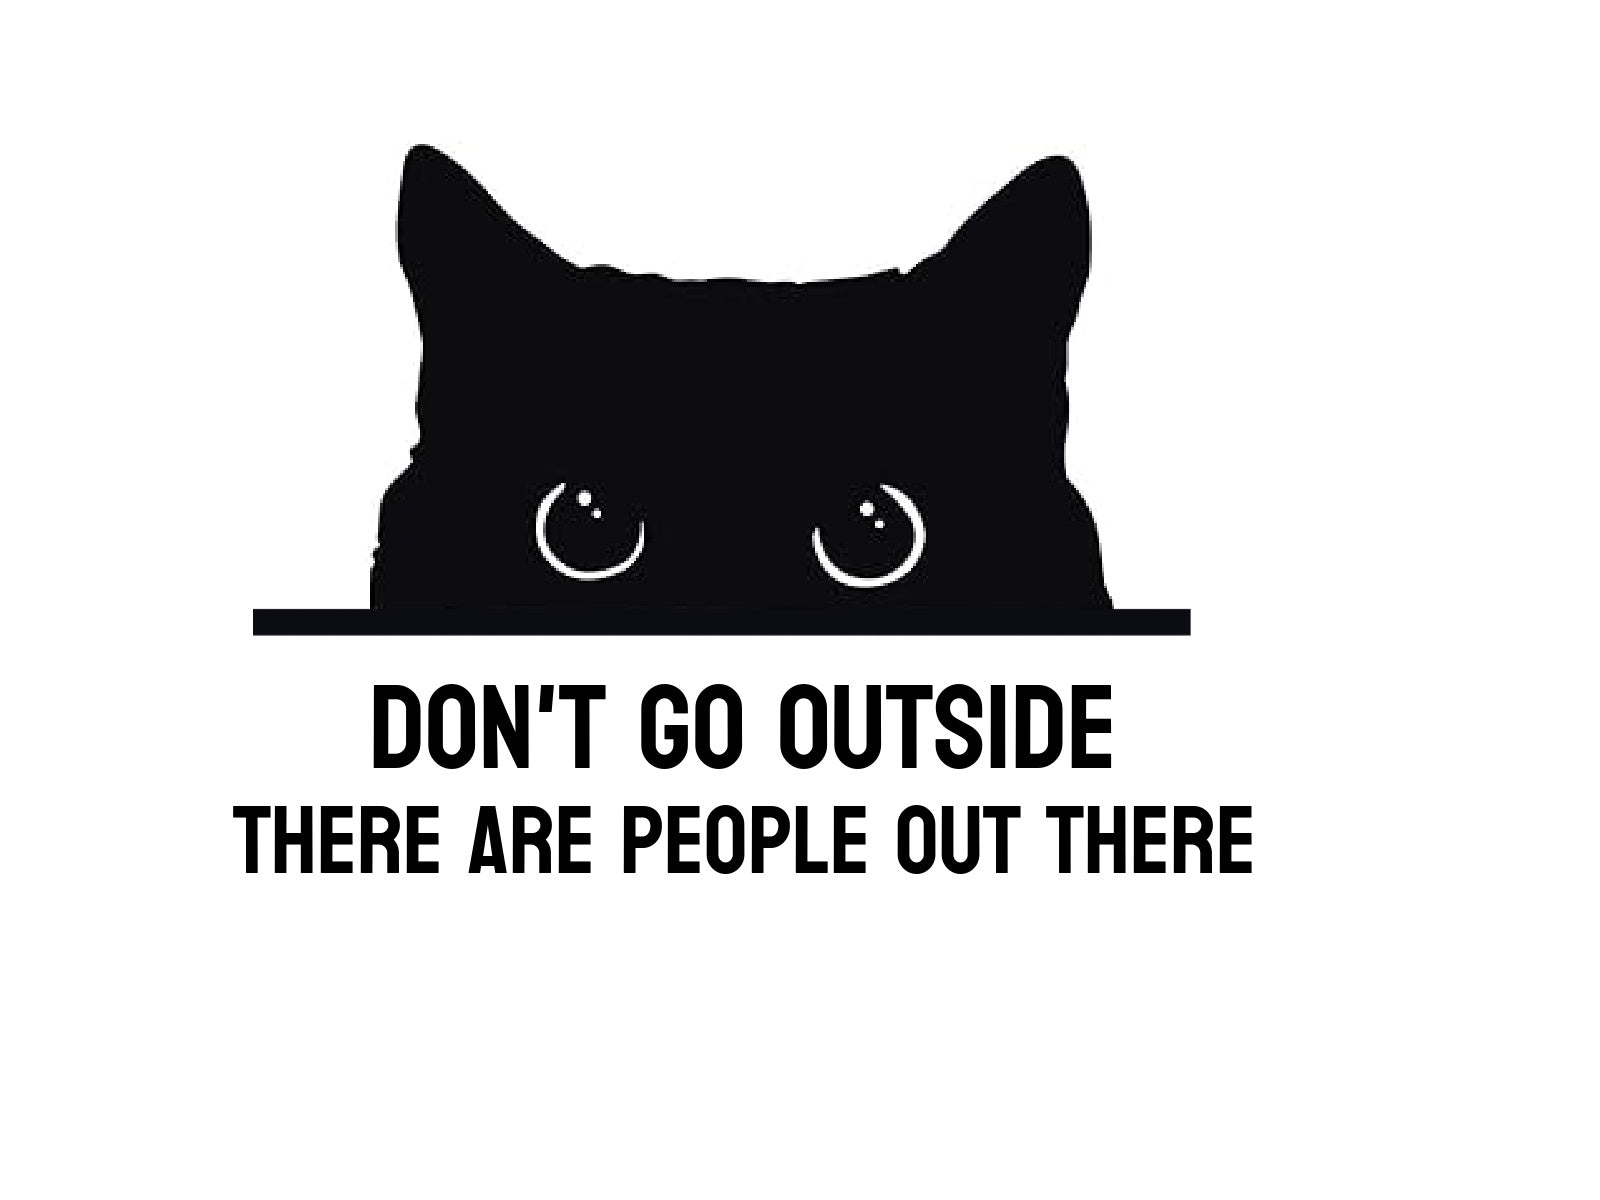 Don't go outside. There are people out there.